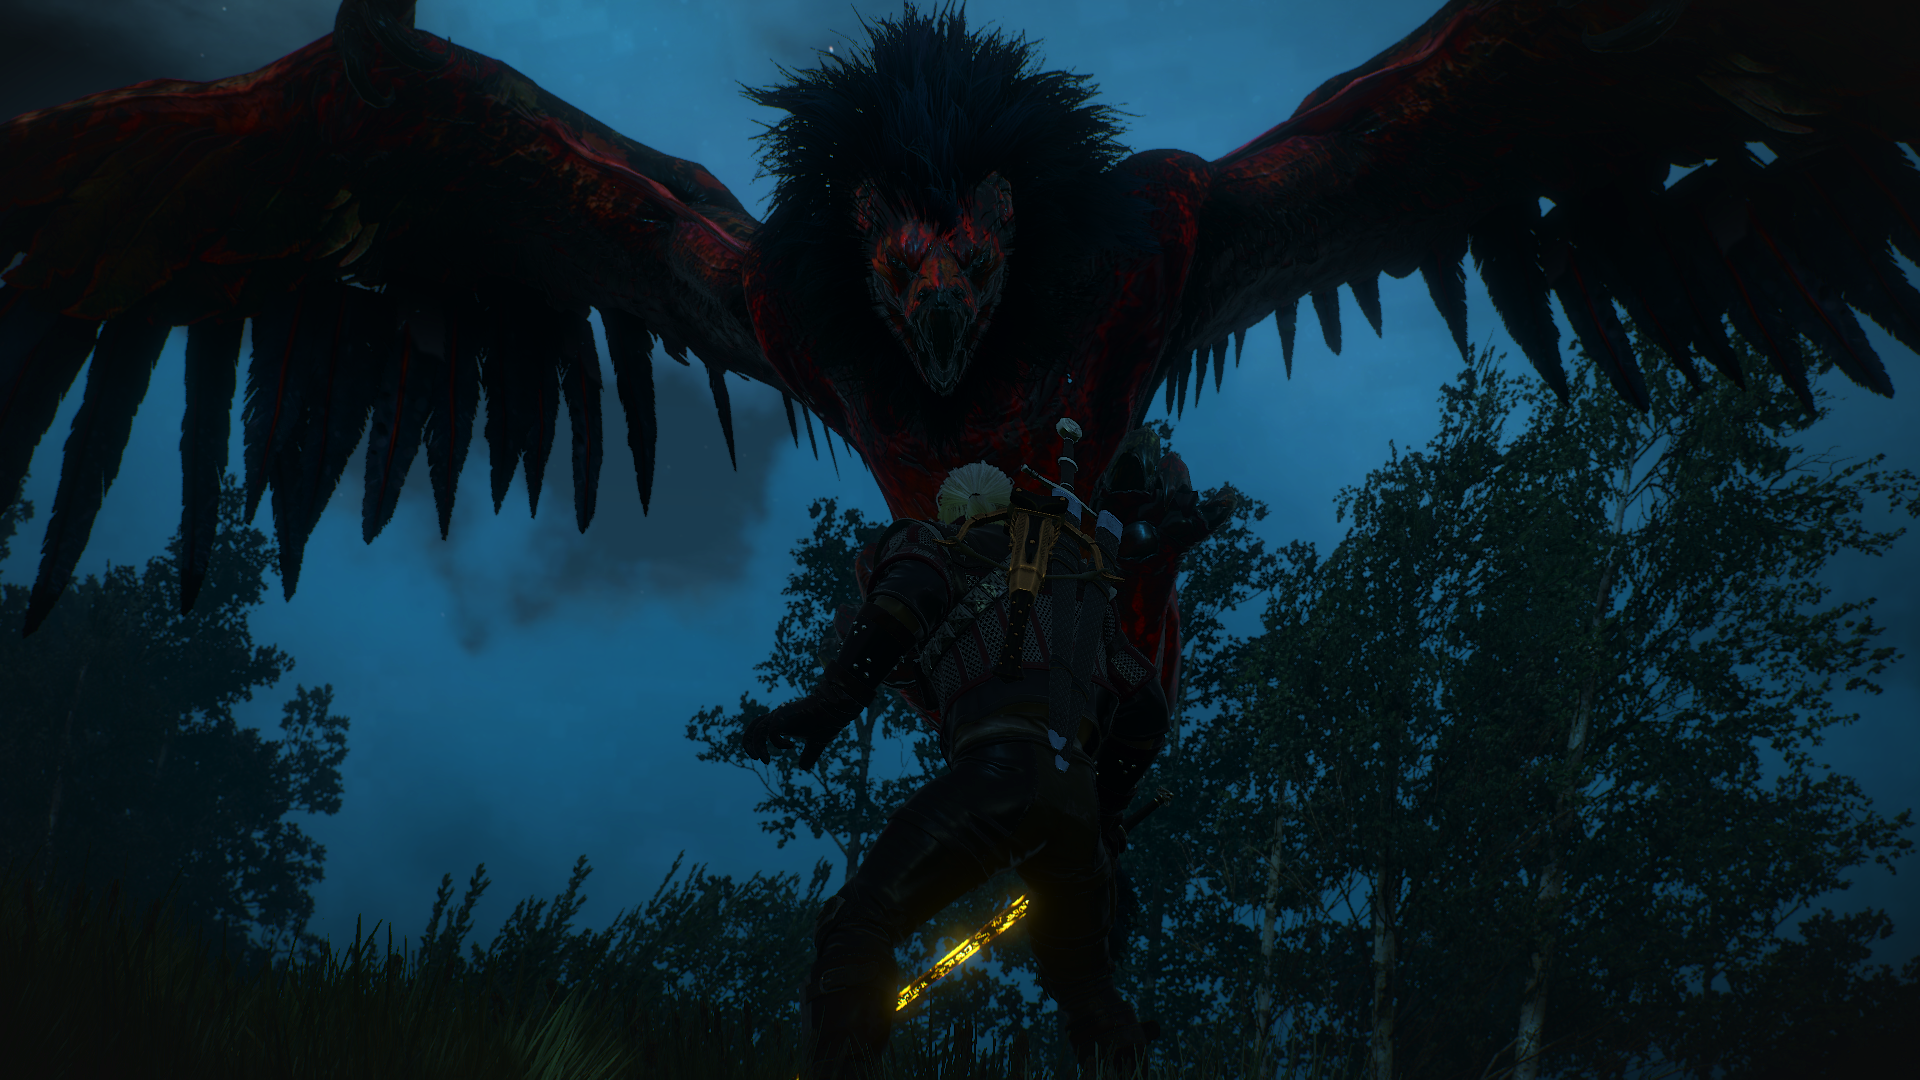 The Witcher 3 Wild Hunt Velen The White Wolf Geralt Of Rivia The Witcher Screen Shot 1920x1080